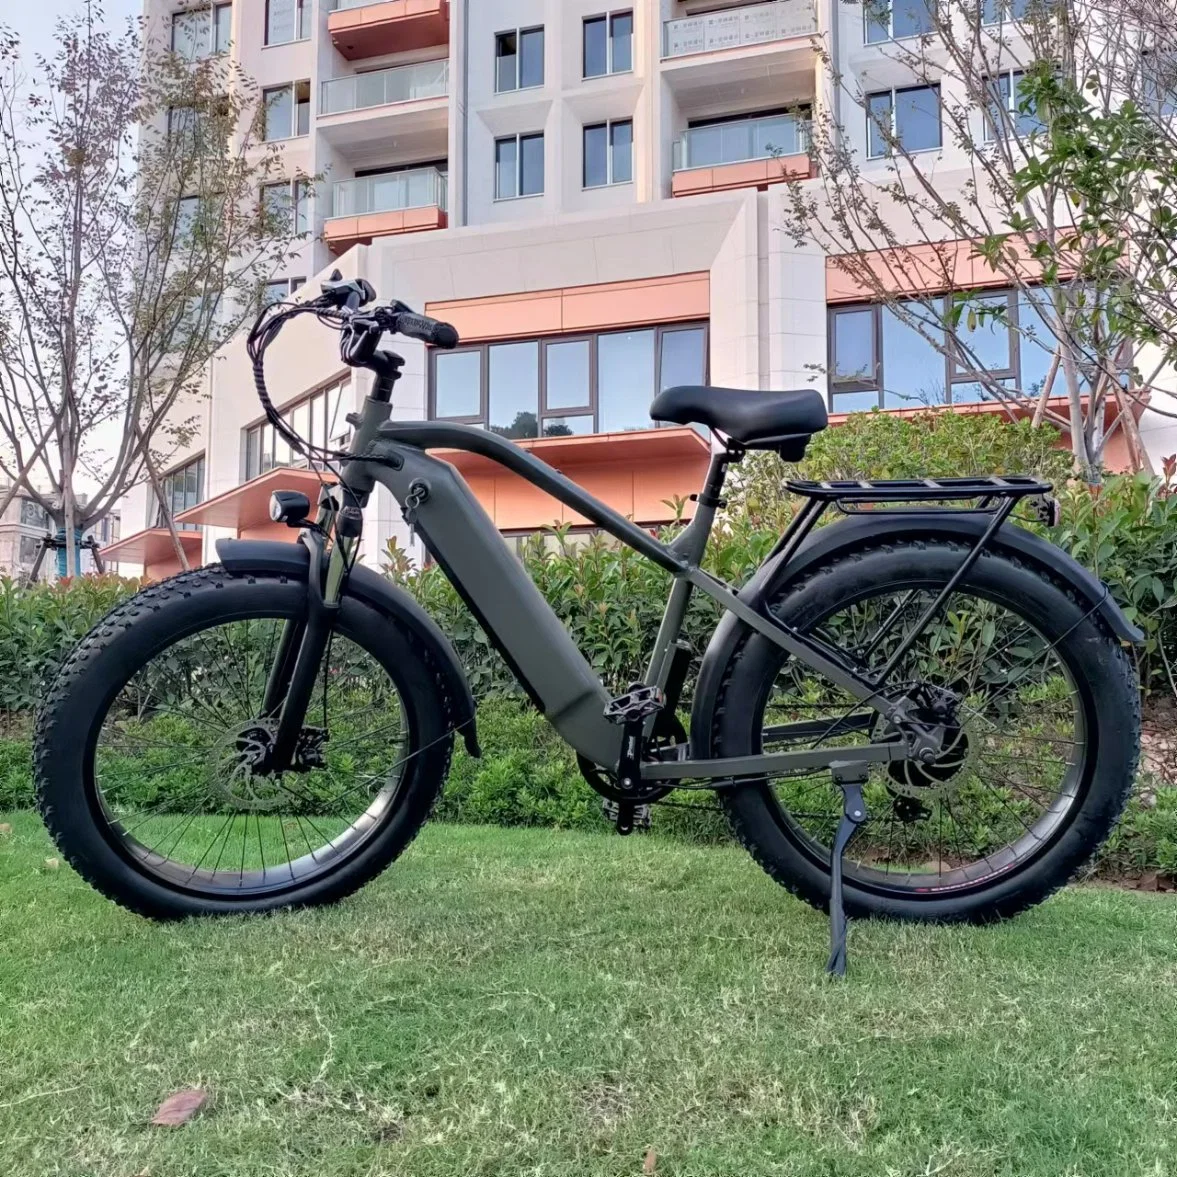 Amazon 26" 750W Powerful 48V/15ah Large Battery off Road Electric Dirt Bicycle 4.0 Tire Fat E Bike